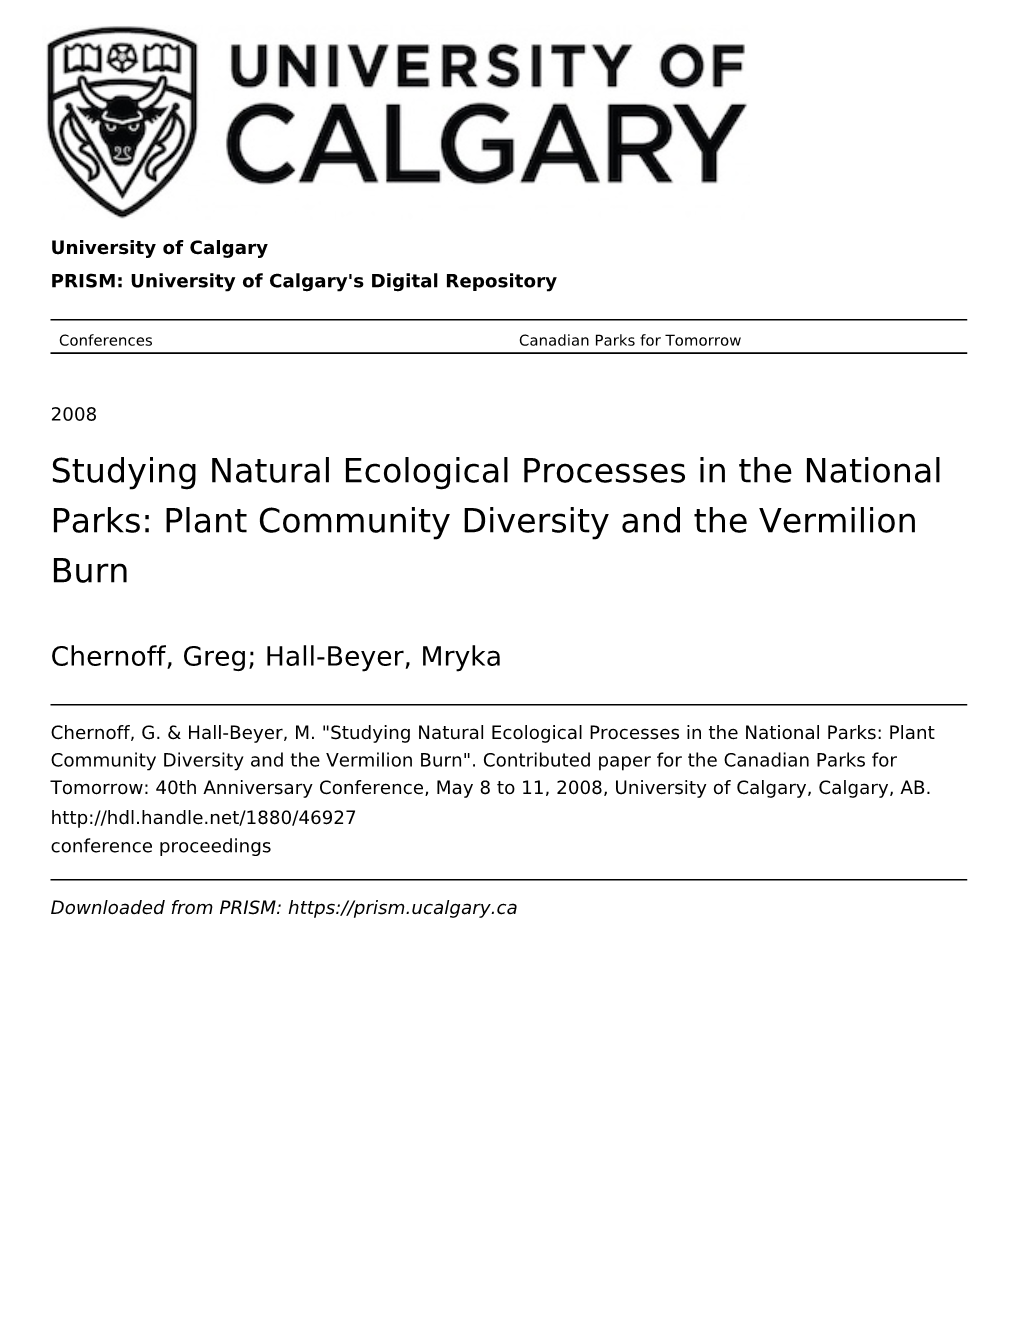 Studying Natural Ecological Processes in the National Parks: Plant Community Diversity and the Vermilion Burn